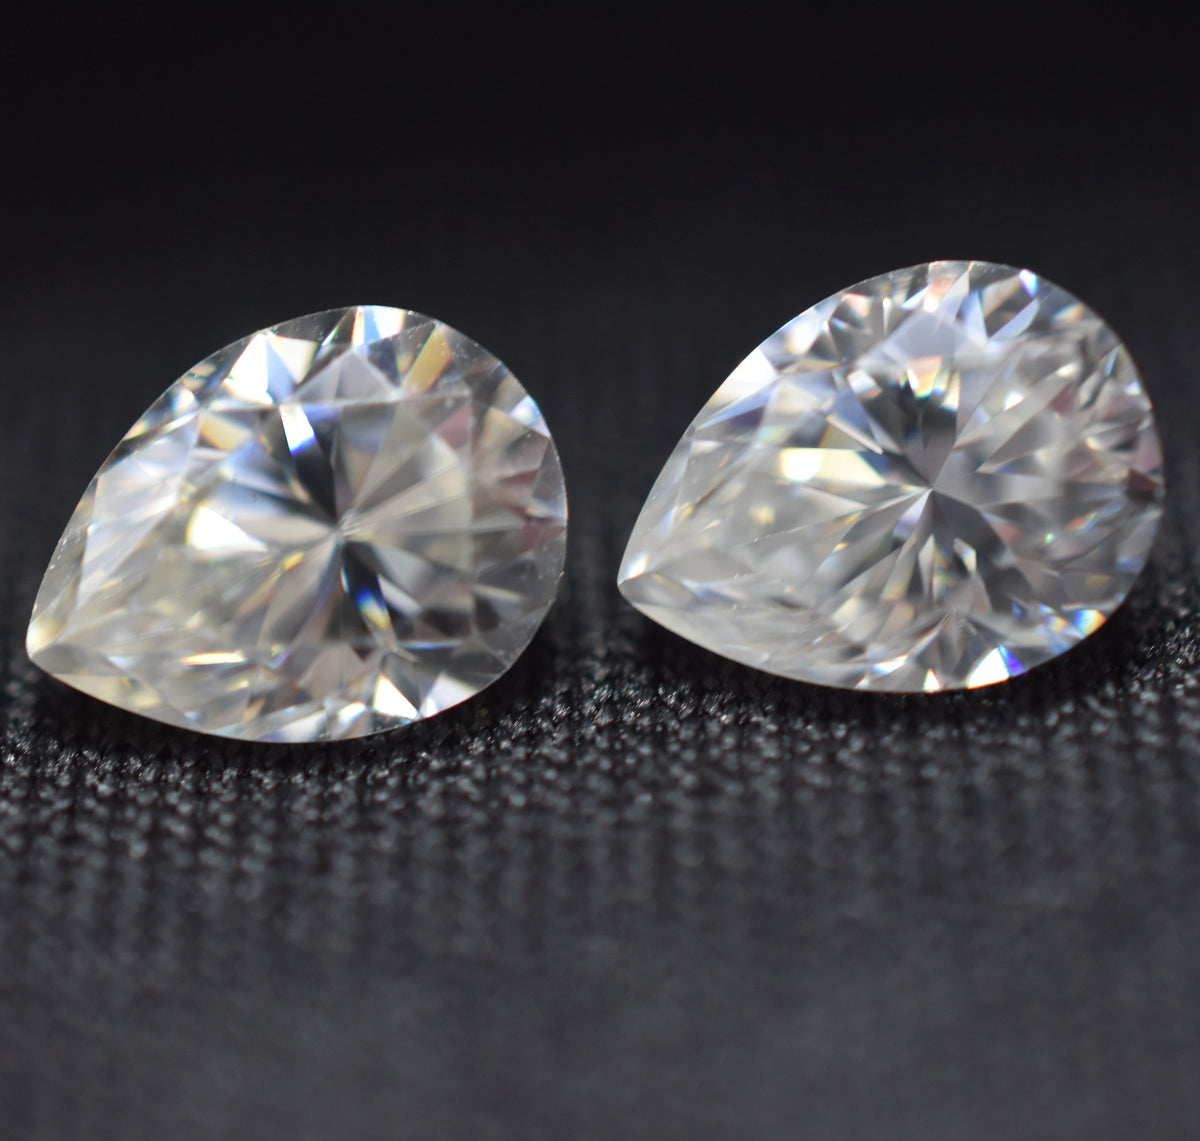 Moissanite Gem Special For Birthday Gift !! Pear Cut Moissanite Pair 2.00 Carat VVS1 D Color 2 Pcs Loose Gemstone CERTIFIED | Moissanite -Brilliance and Sparkle